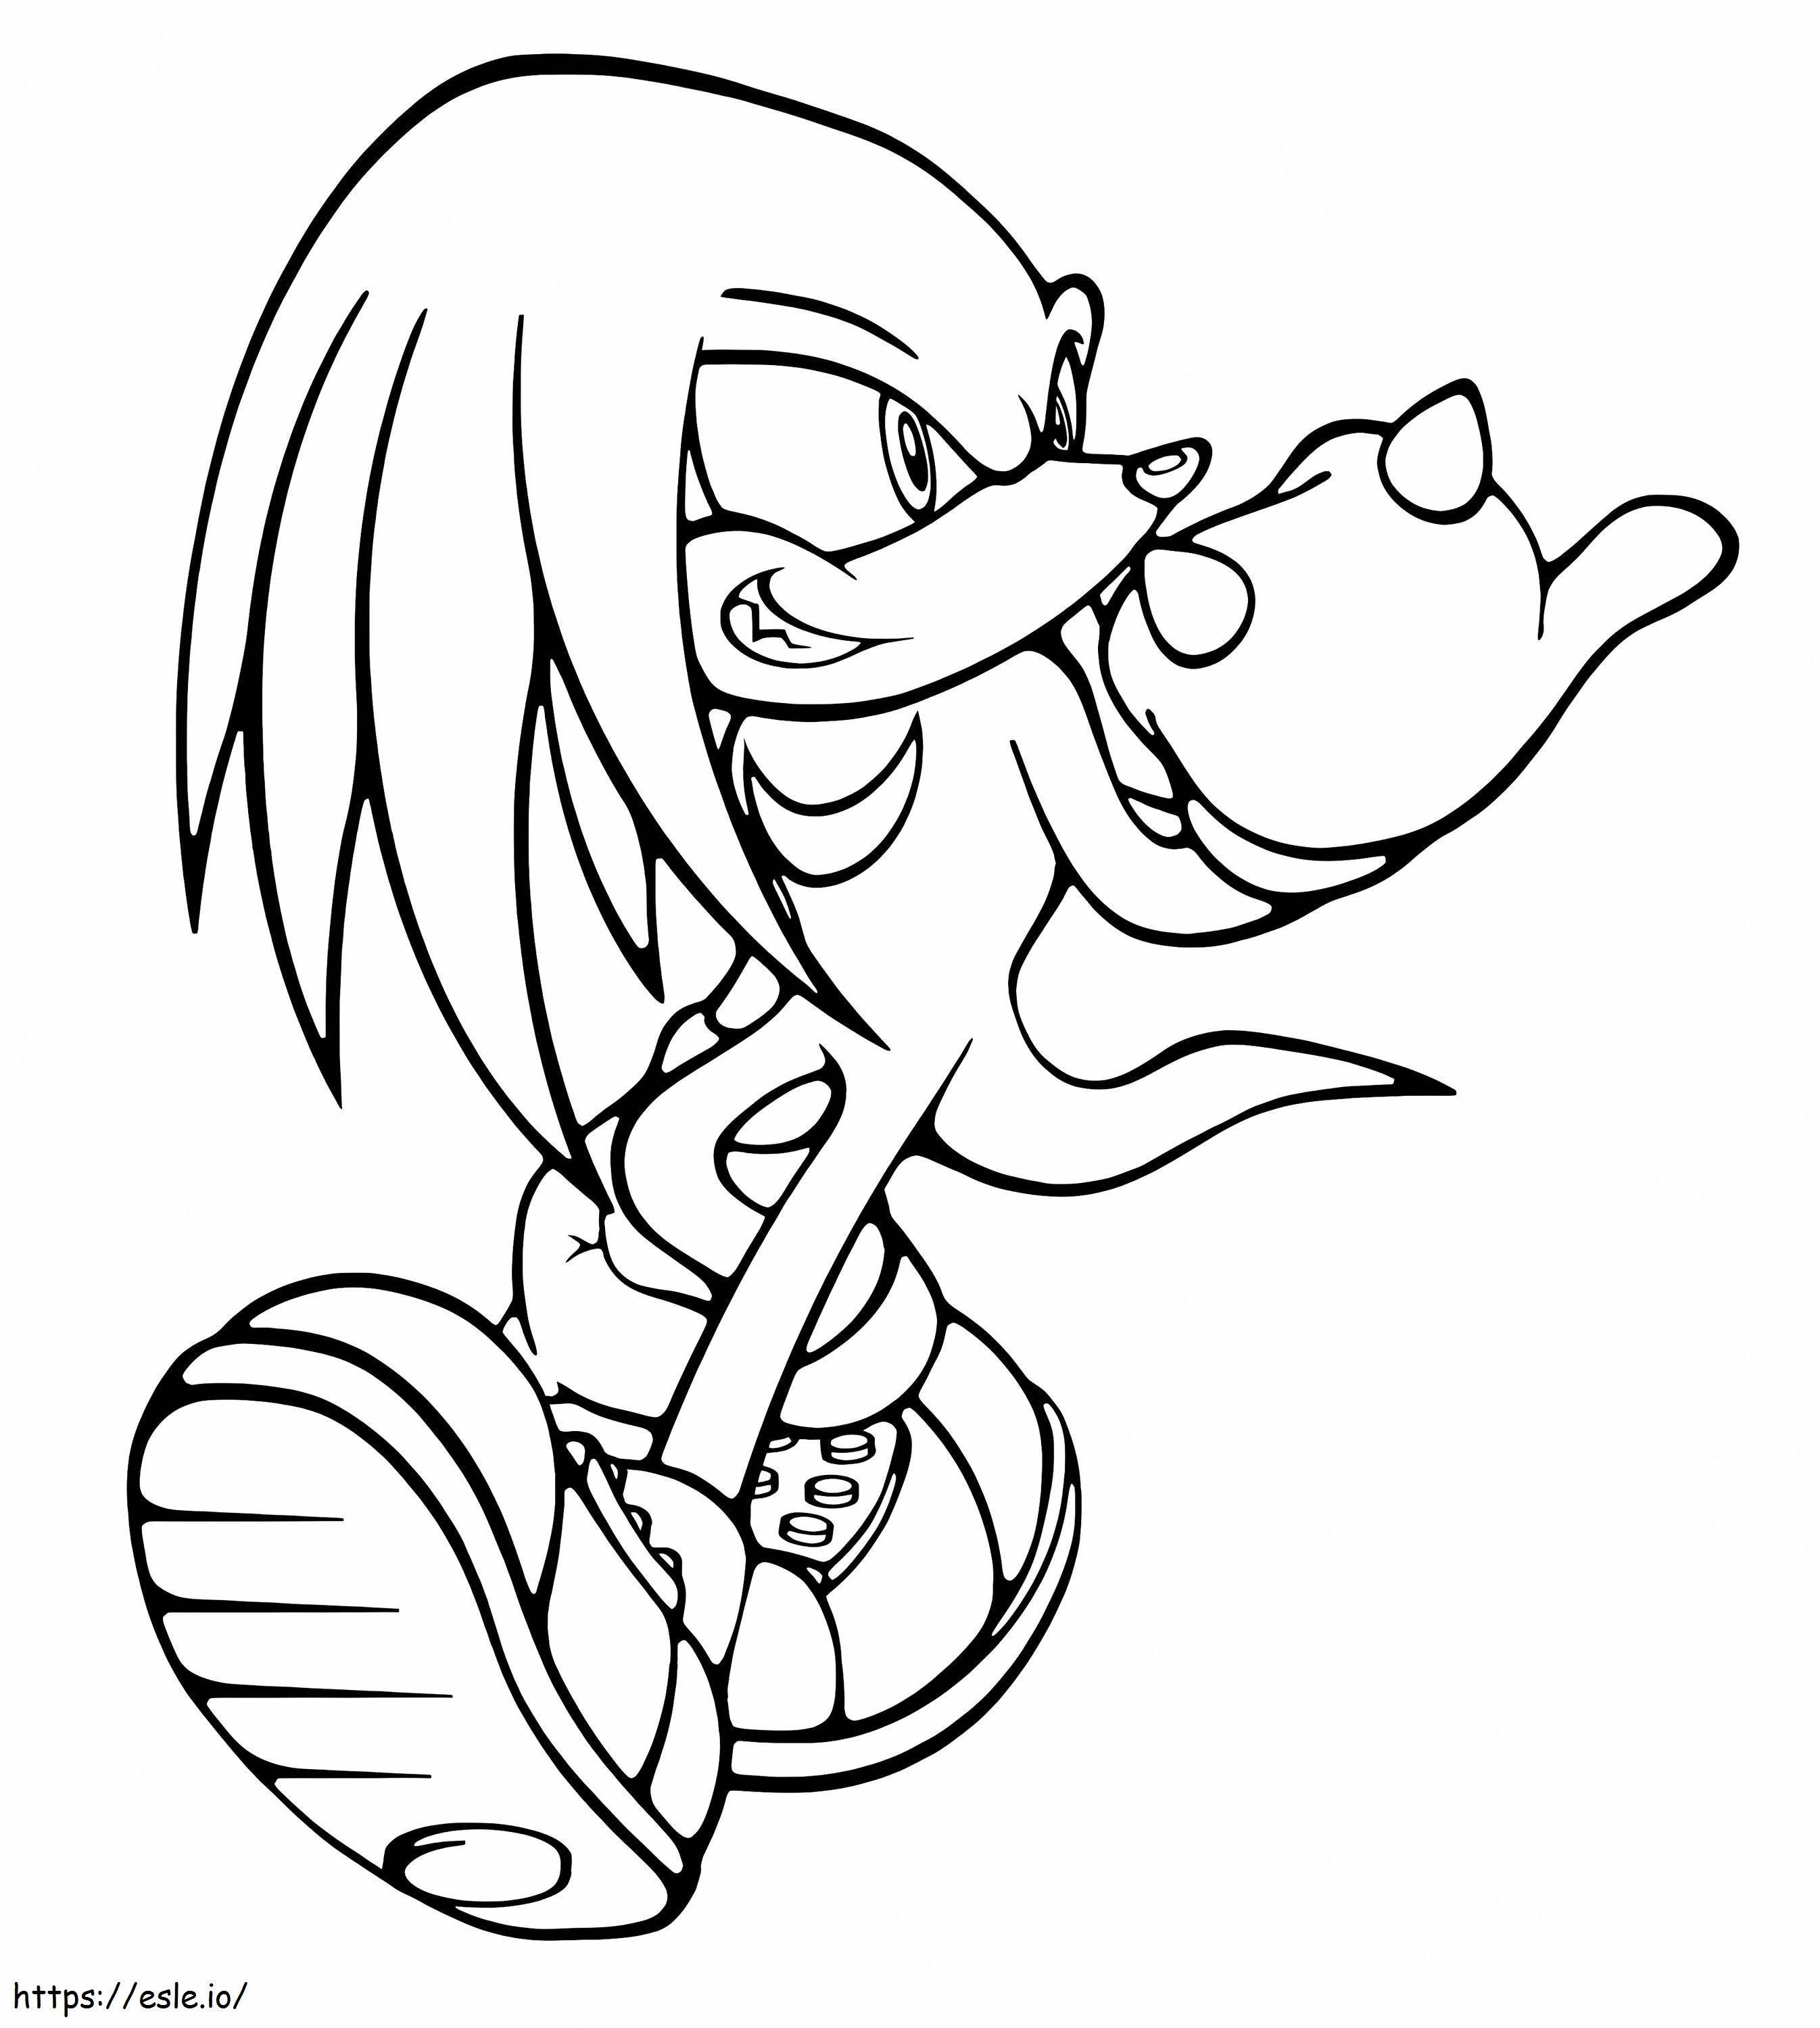 Printable Knuckles The Echidna coloring page